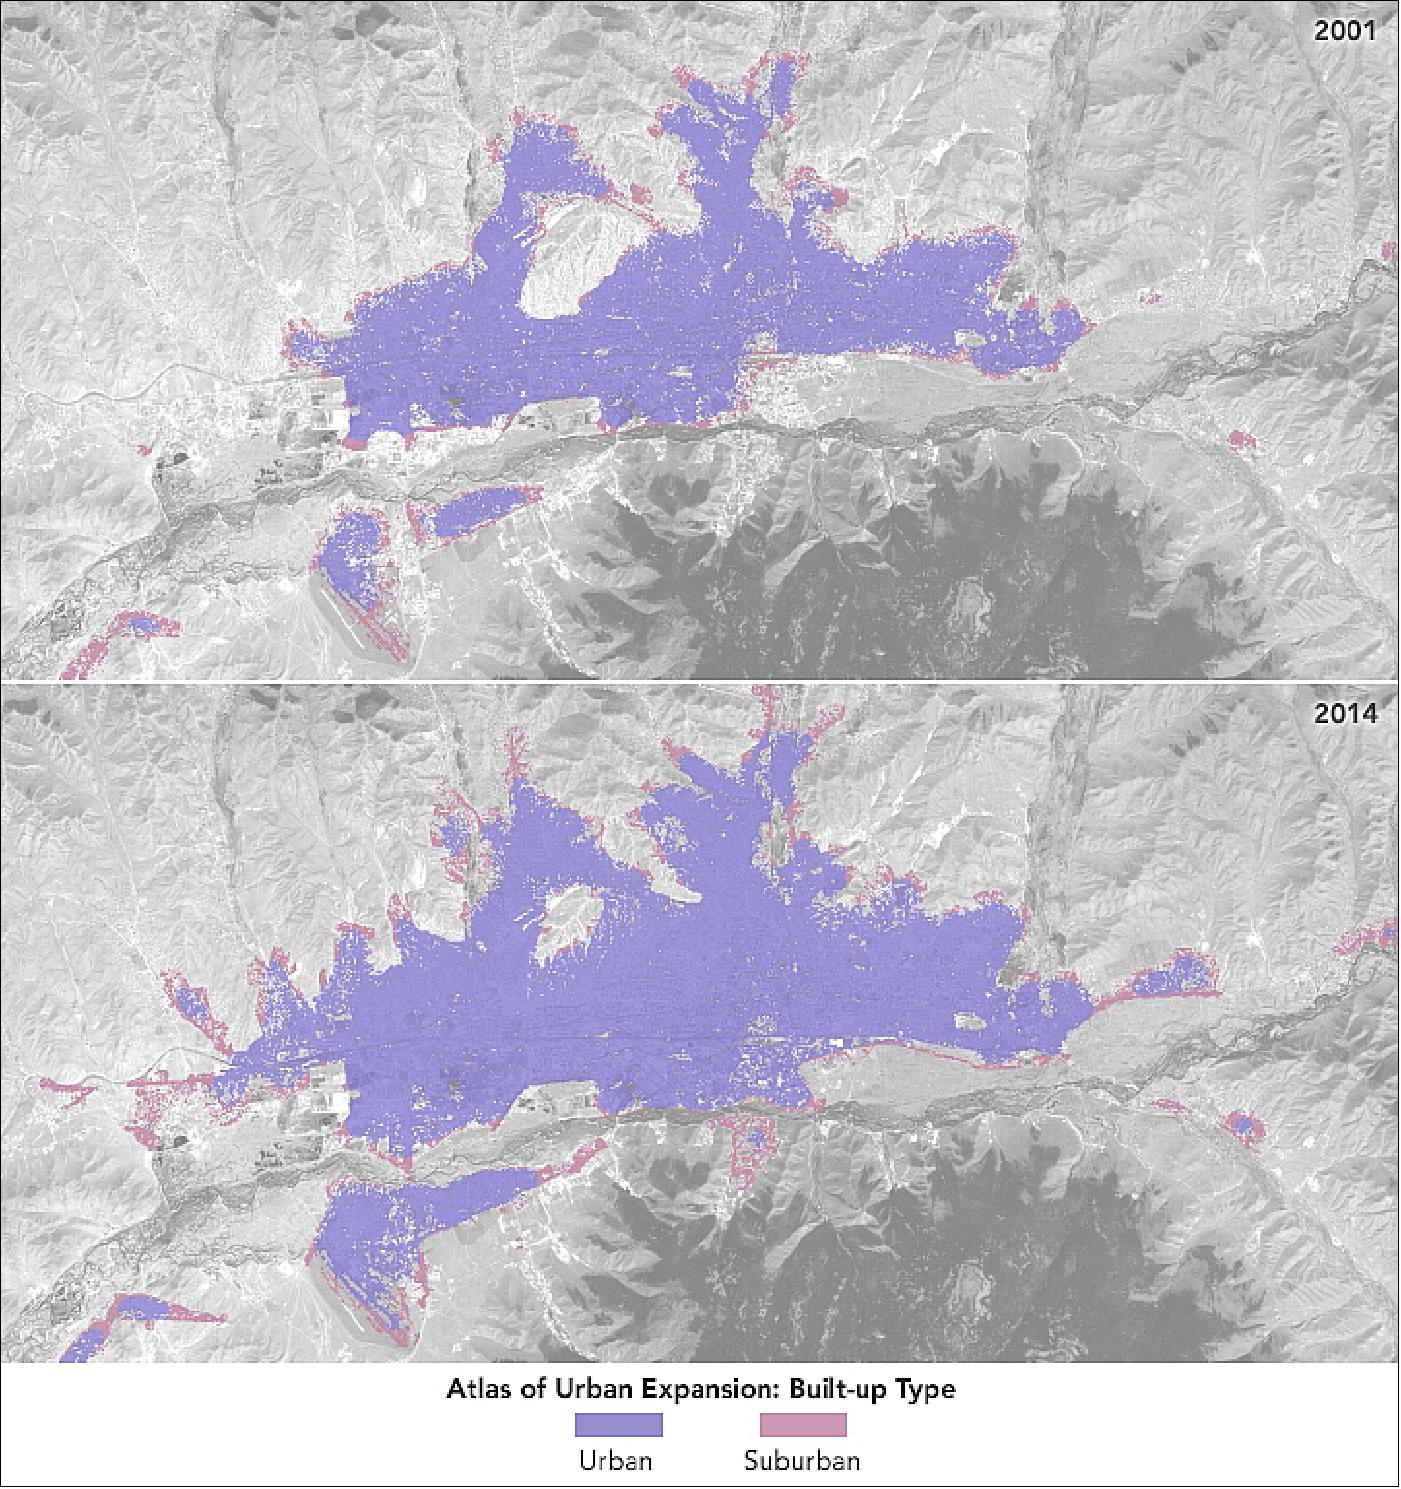 Figure 26: These Landsat-based maps, which show data from the Atlas of Urban Expansion, make it easier to distinguish developed areas. Researchers defined urban areas as those with at least 50 percent of pixels classified as “built-up,” and suburban areas as those with 25 to 50 percent of pixels built-up. (Built-up areas well beyond the center of the city were not included in the visualization, but you can explore exurban built-up areas here.) Between 2001 and 2014, Ulaanbaatar’s population increased by 4.1 percent each year (from 630,000 to 1,070,000 people) and the built-up area increased from 11,894 hectares to 20,051 hectares (200.51 km2).